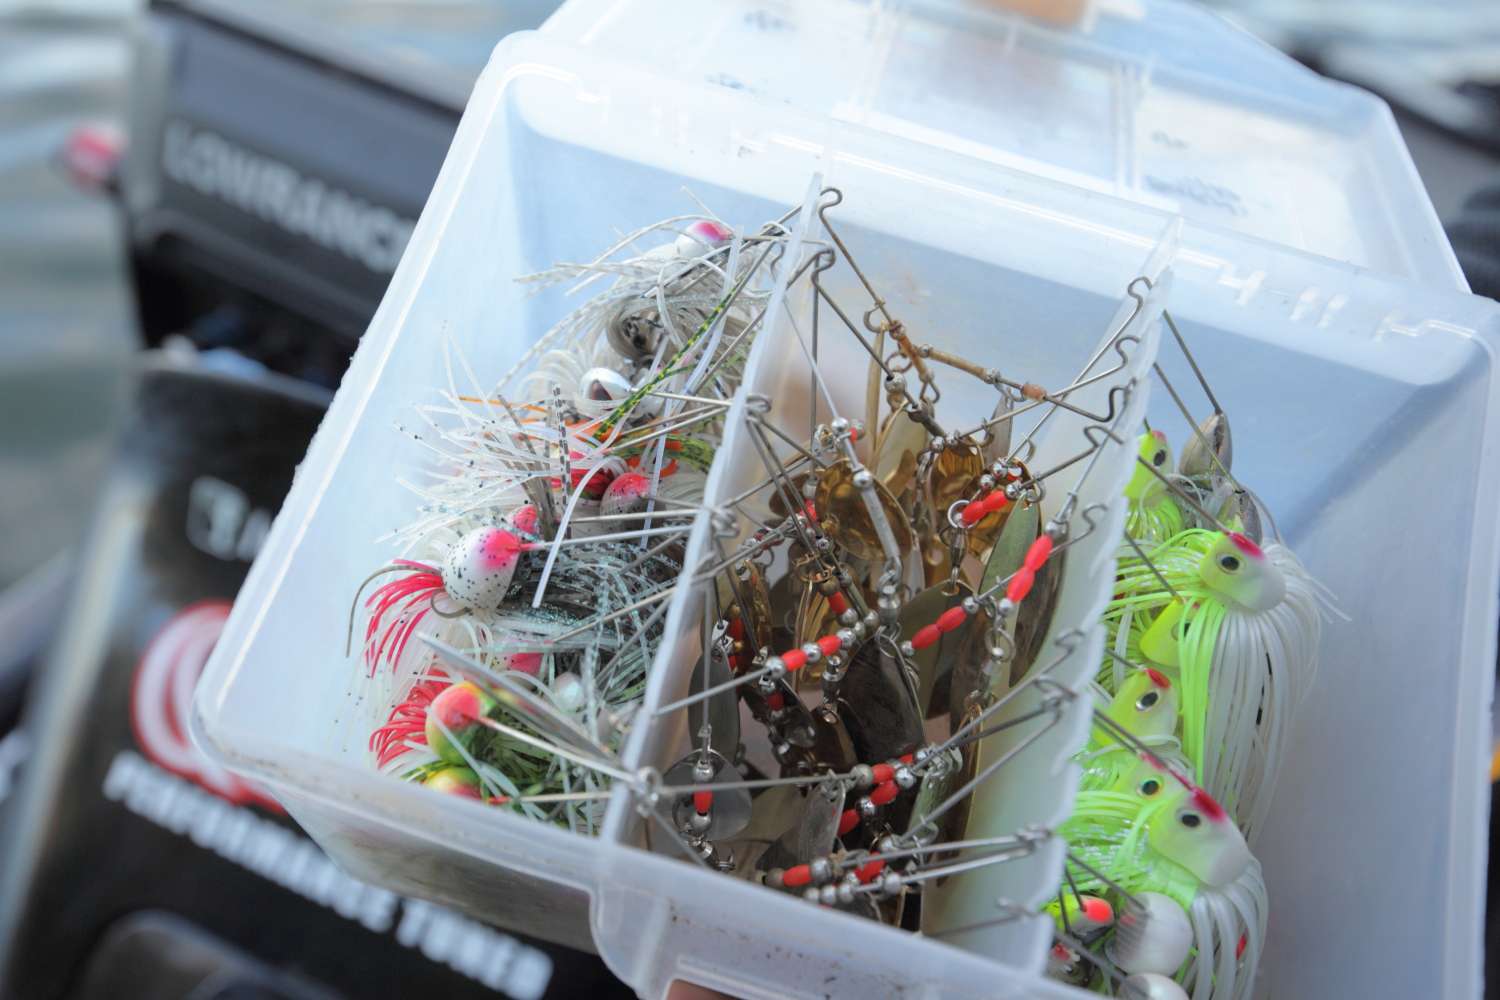 Usually the space holds a box of spinnerbaits. Lee said the boxes seem to fit the area well.